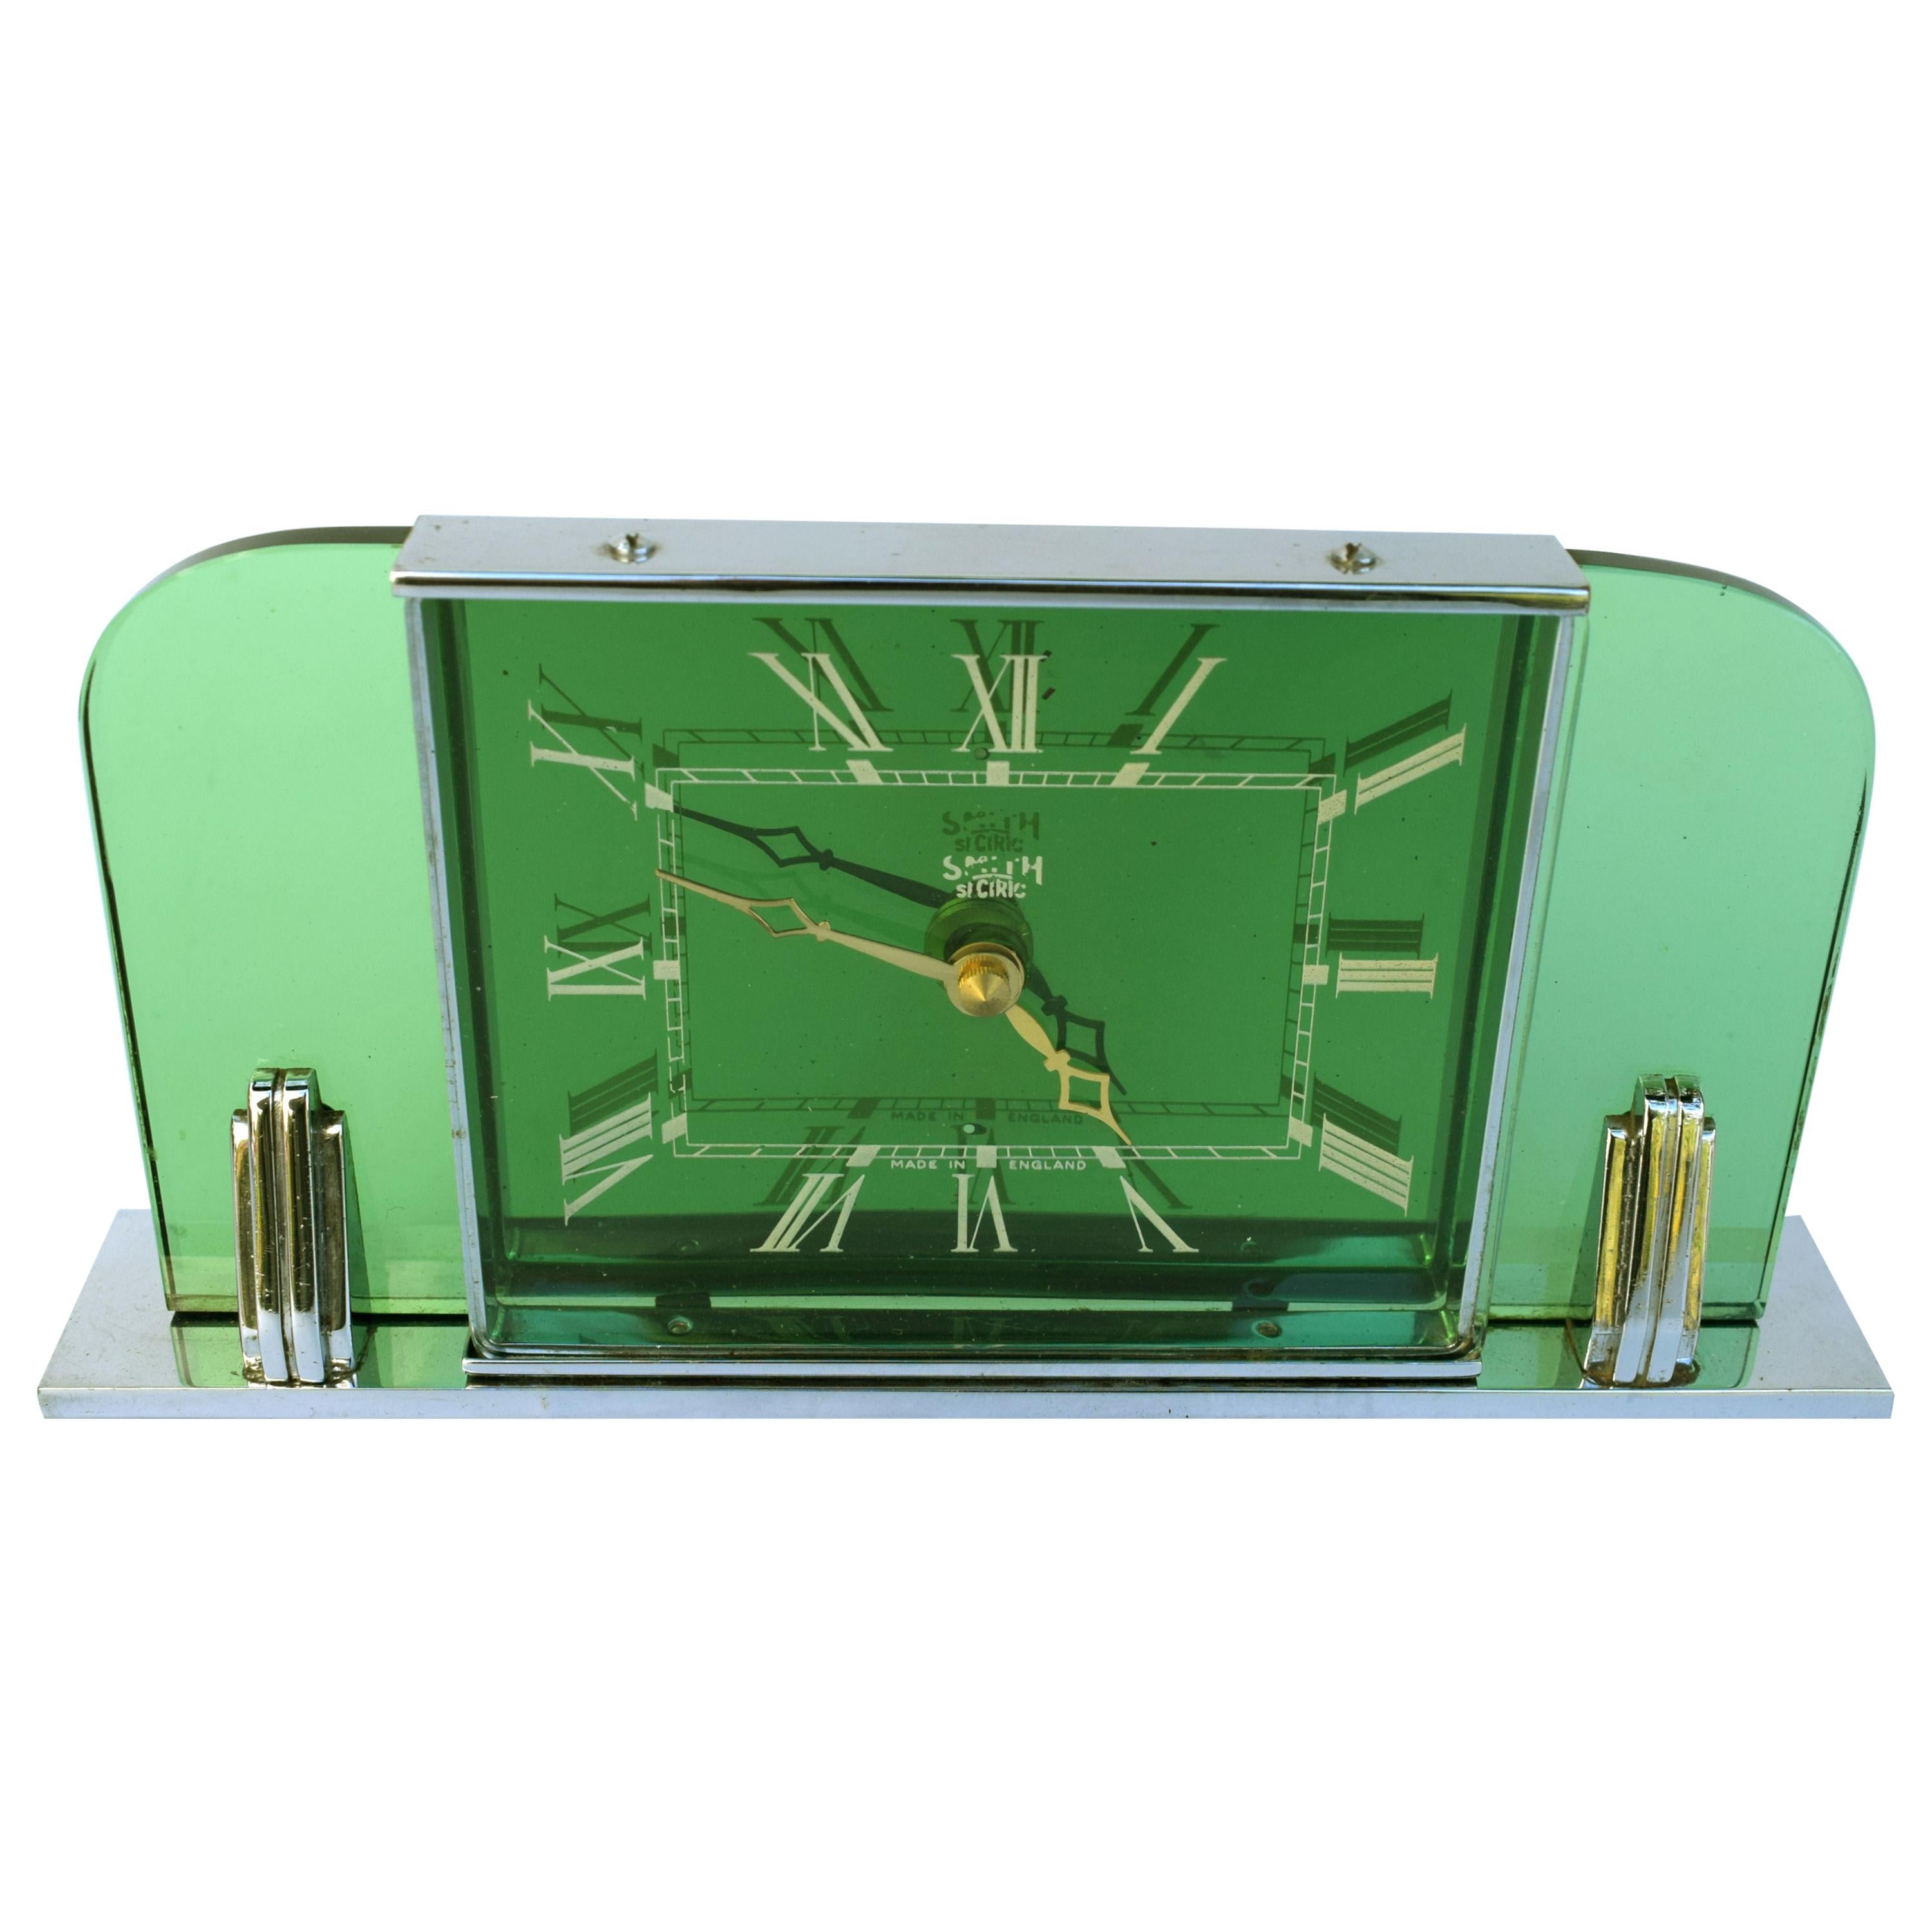 Art Deco Green Glass, Mirror and Chrome Clock by Smiths Clockmakers, circa 1930